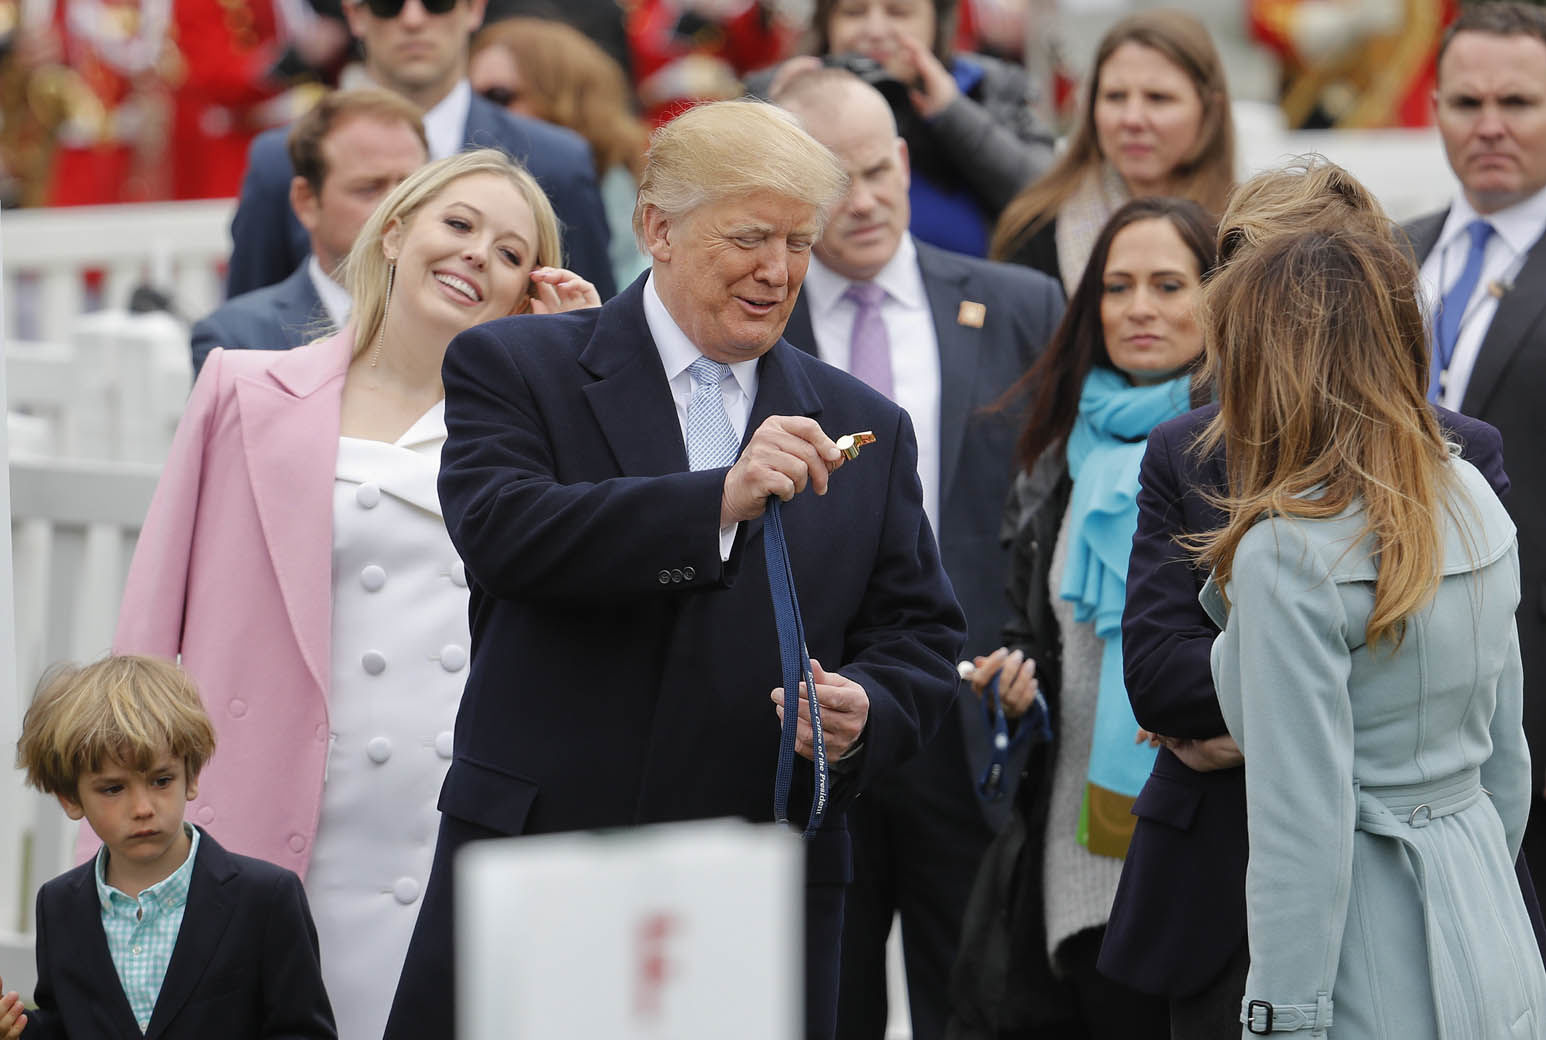 President Donald Trump holds out his whistle to first lady Melania Trump, right, during the annual White House Easter Egg Roll on the South Lawn of the White House in Washington, Monday, April 2, 2018. On the left is Trump's daughter Tiffany Trump. (AP Photo/Pablo Martinez Monsivais)